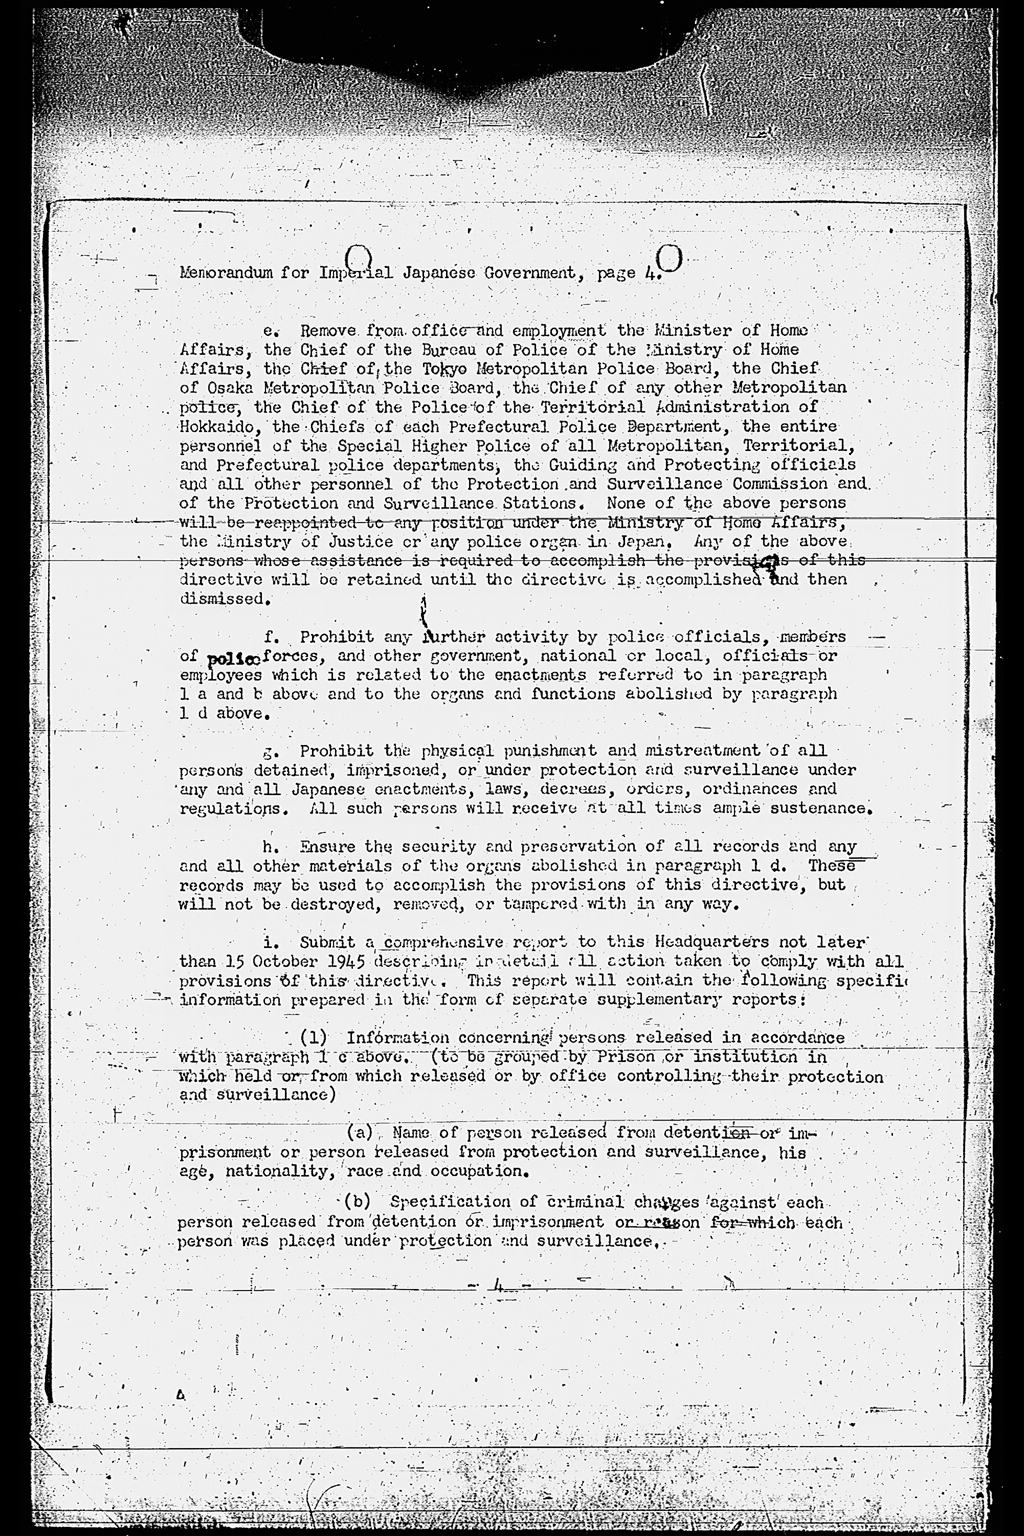 Memorandum for: Imperial Japanese Government. Through: Central Liaison Office, Tokyo. Subject: Removal of Restrictions on Political, Civil, and Religious Liberties.(SCAPIN-93)(larger)